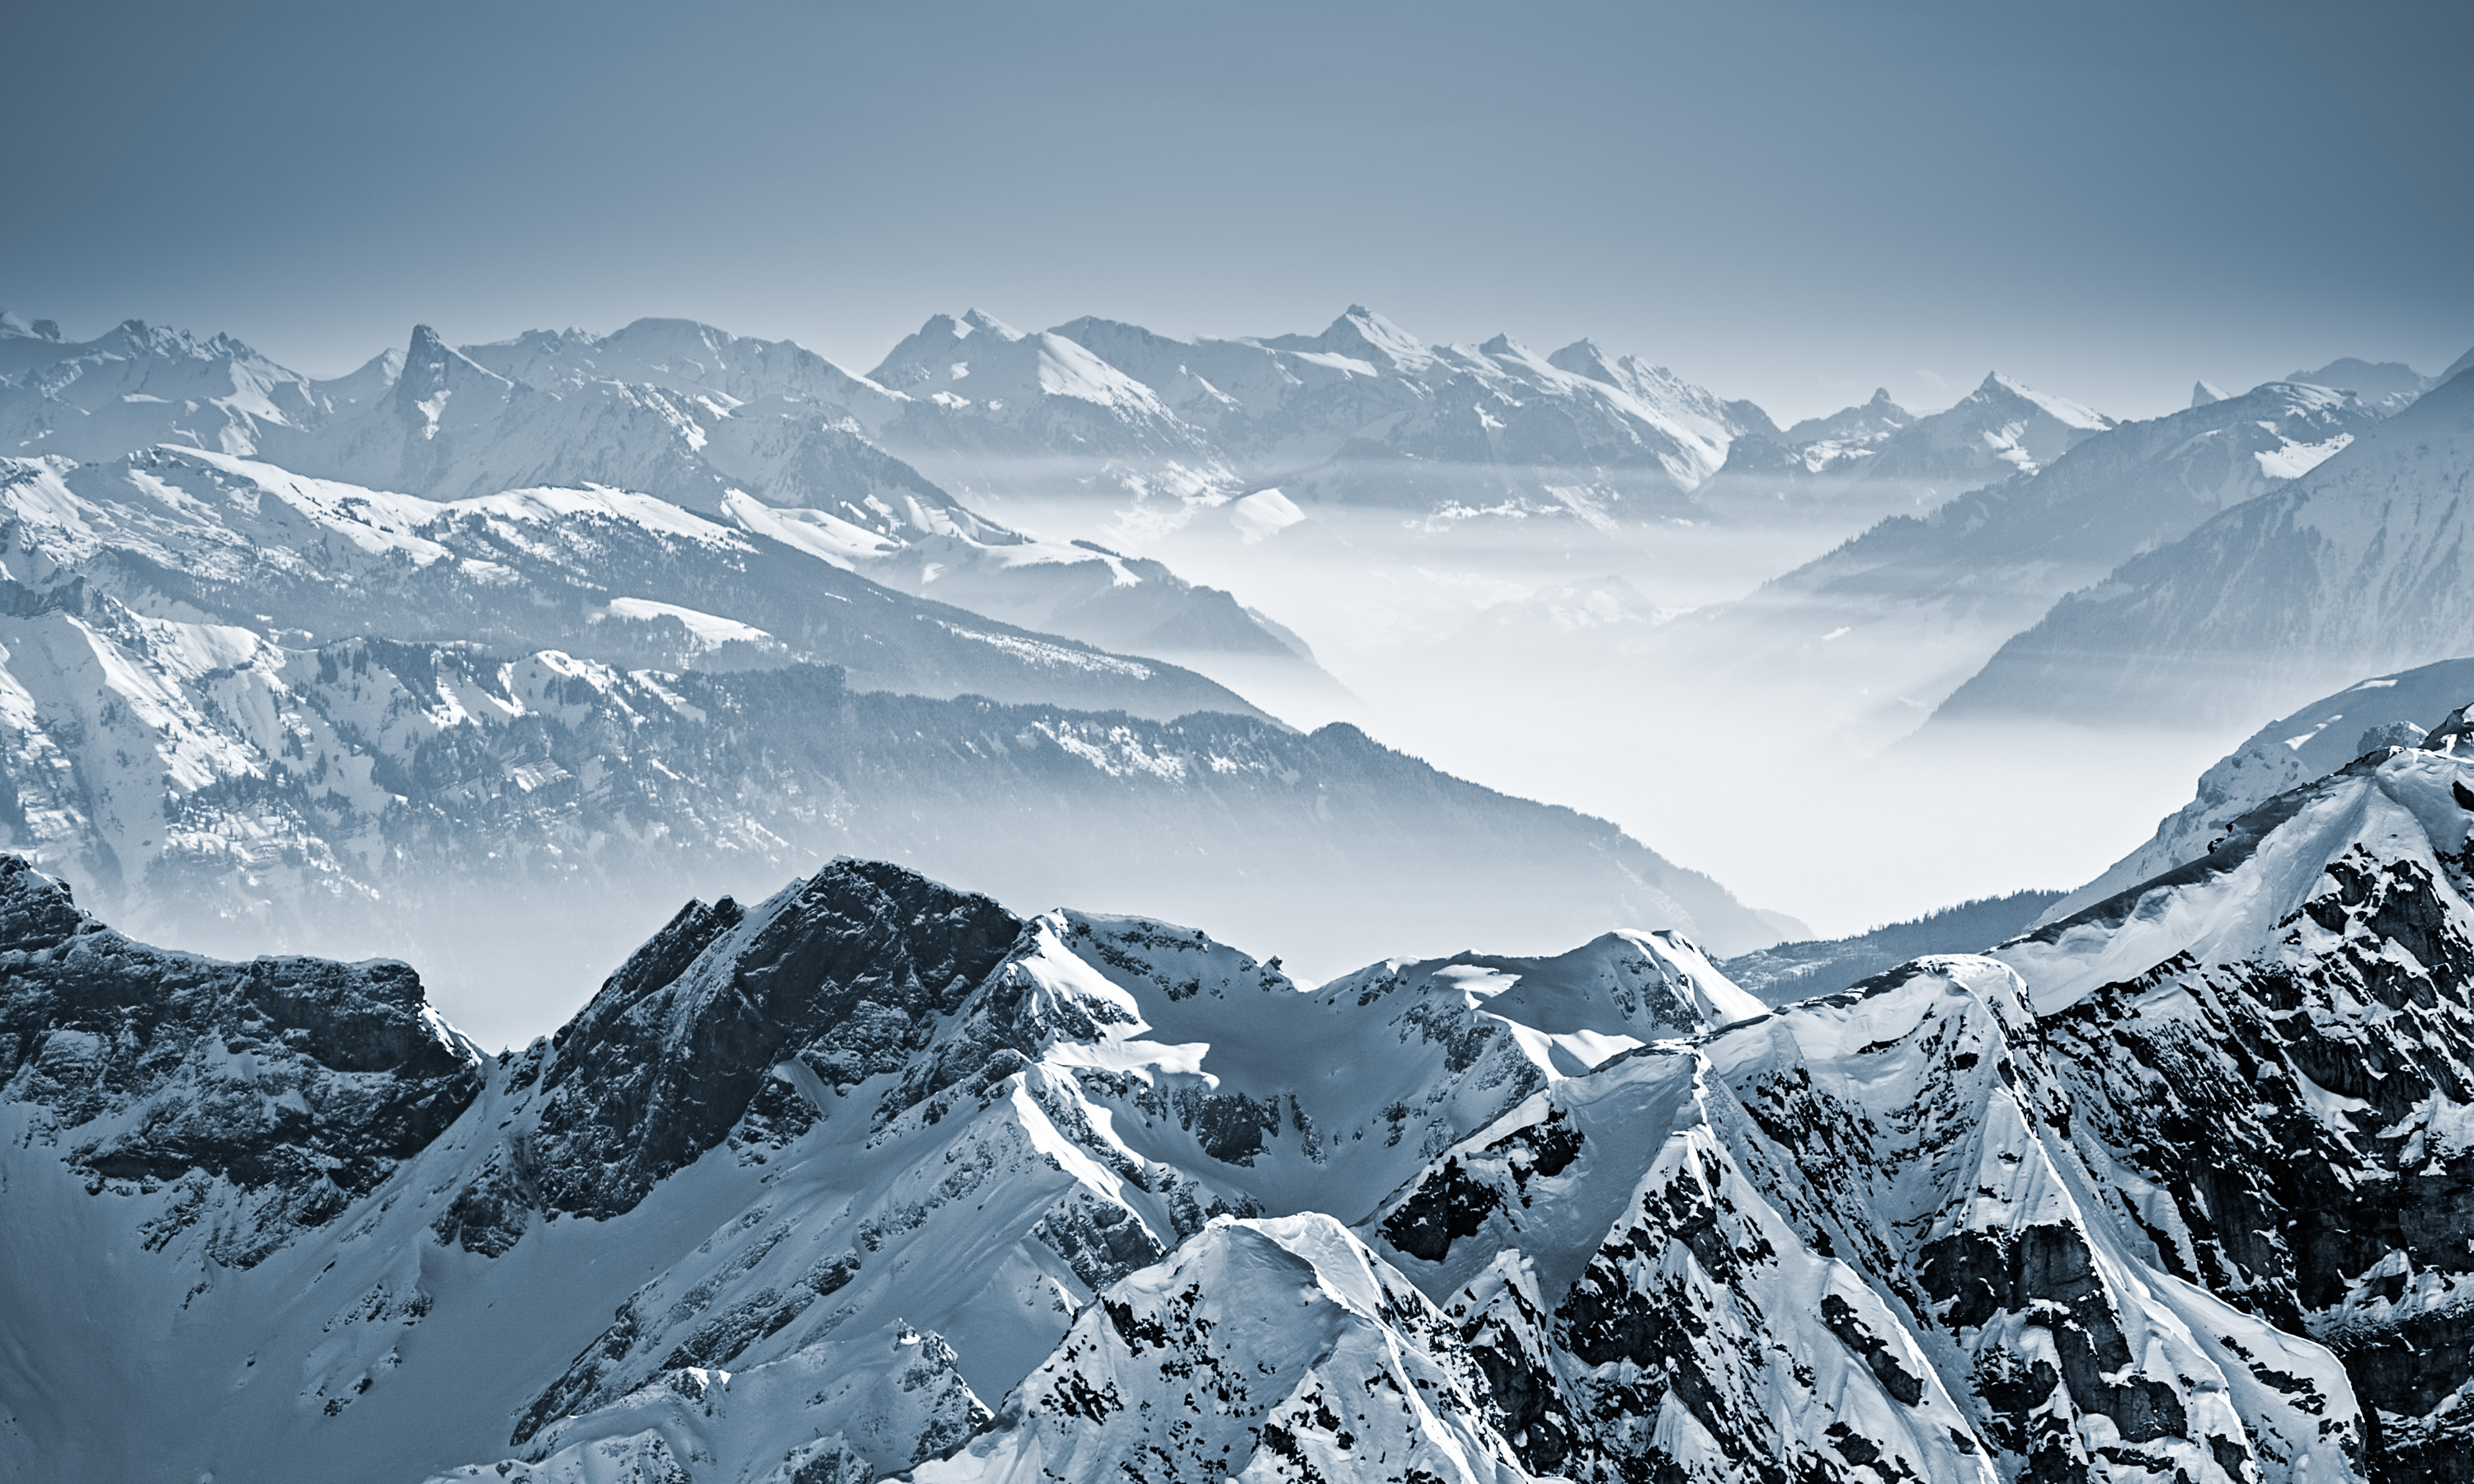 Snowy Mountains in the Swiss Alps - BOREAL